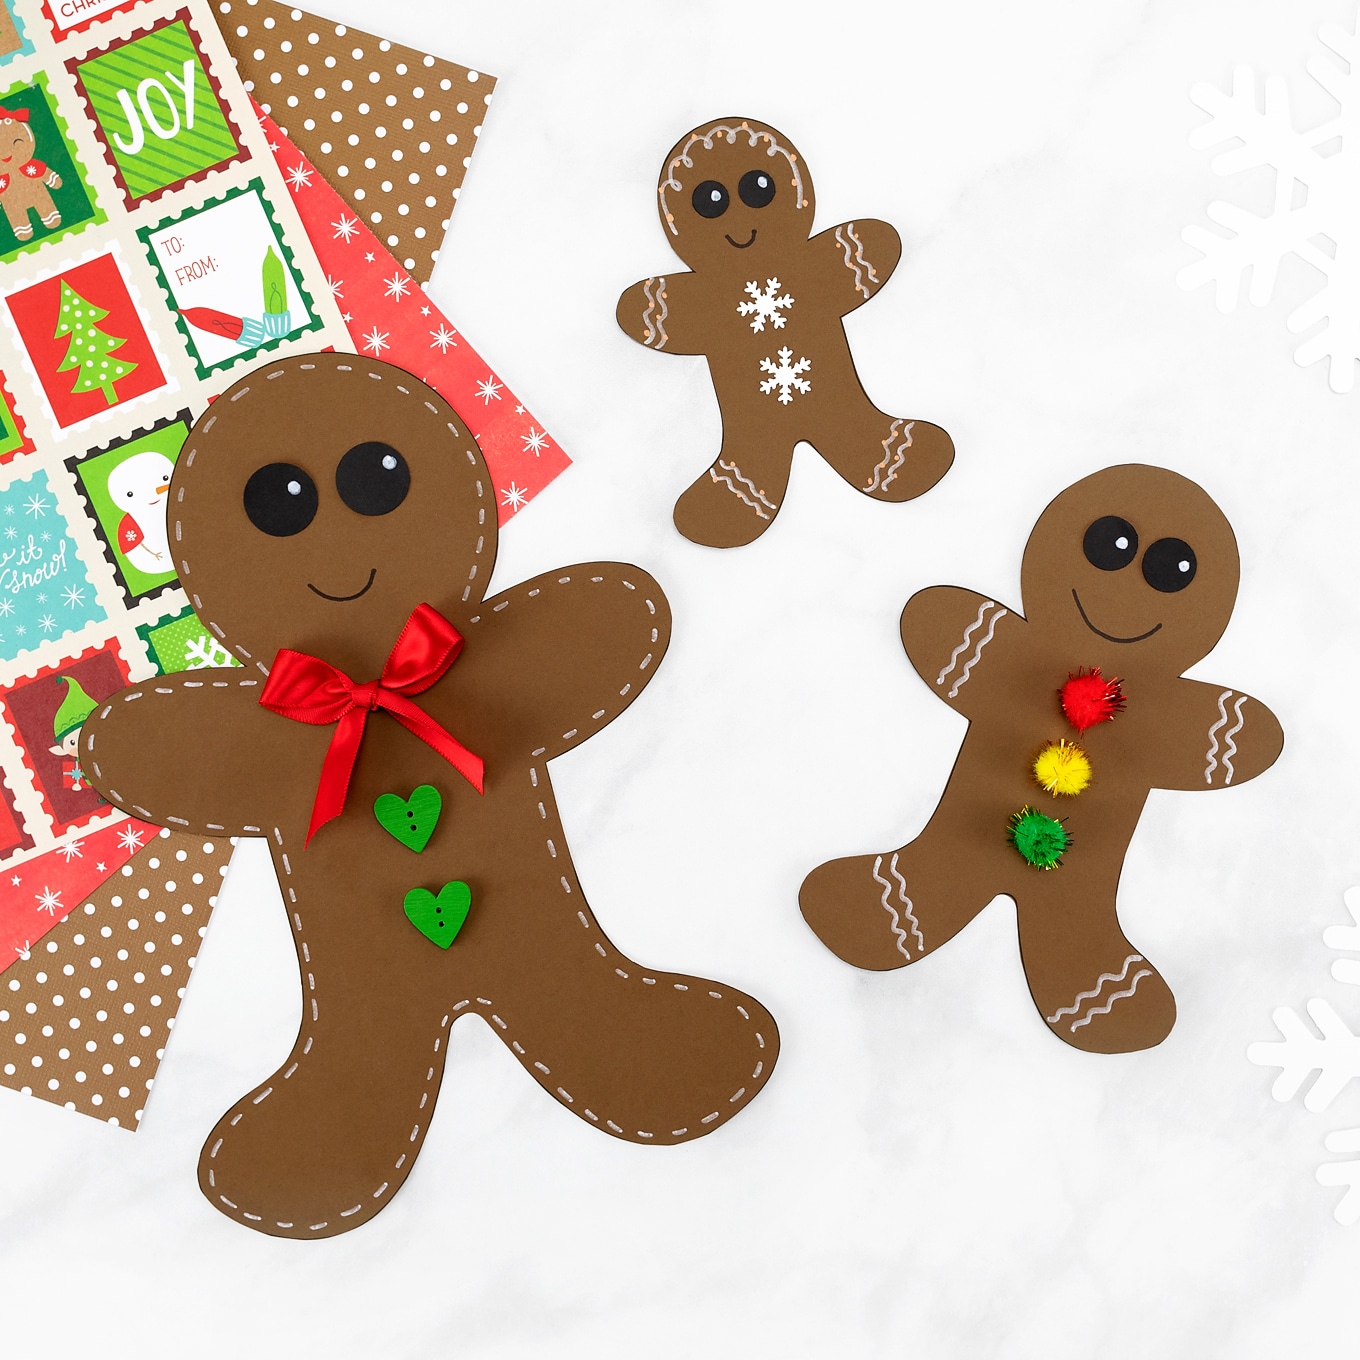 41 Easy Christmas Paper Crafts to Make for the Holidays: Gingerbread Man Template